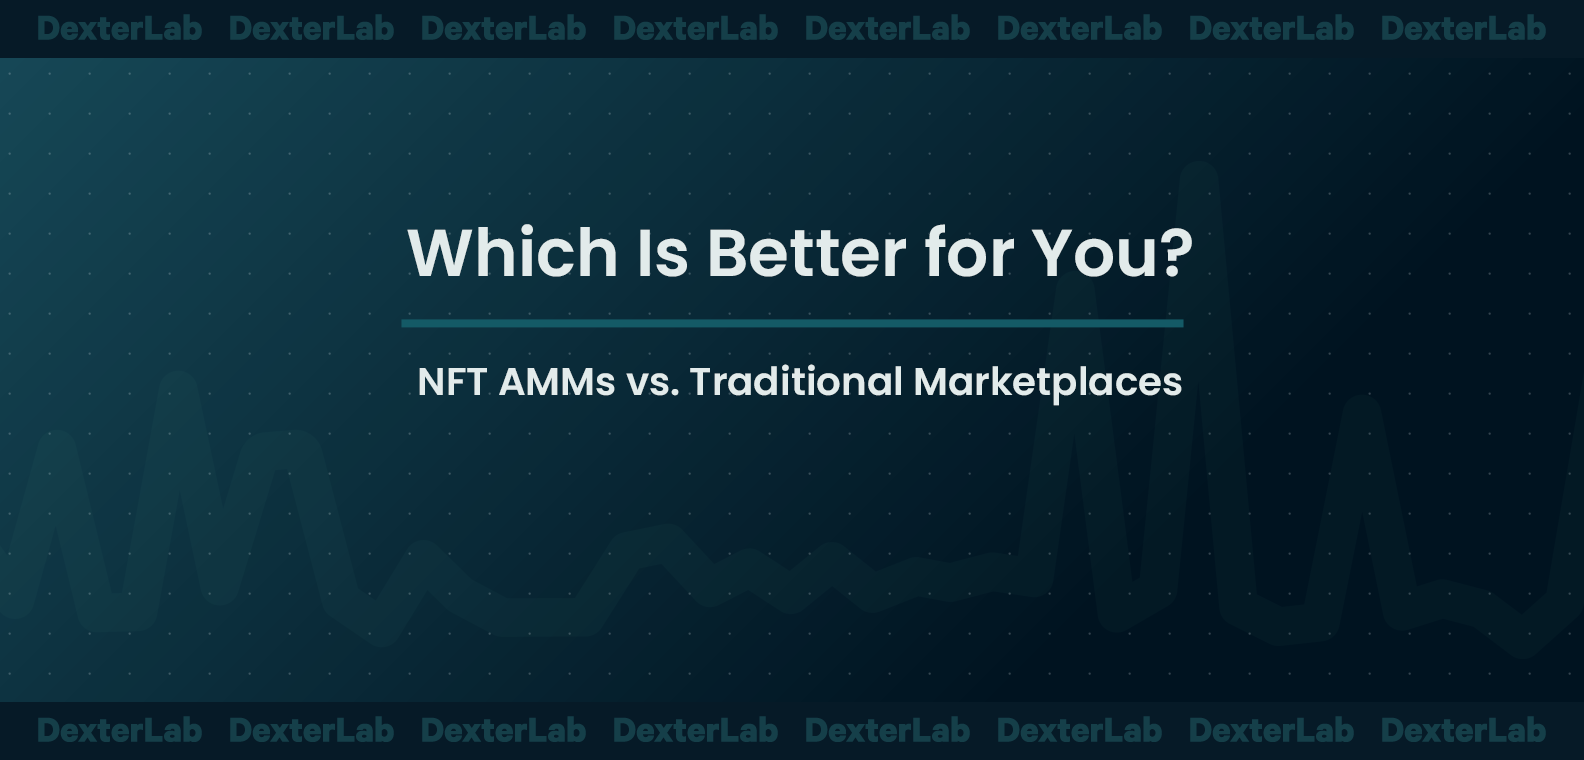 NFT AMMs vs. Traditional Marketplaces: Which Is Better for You?